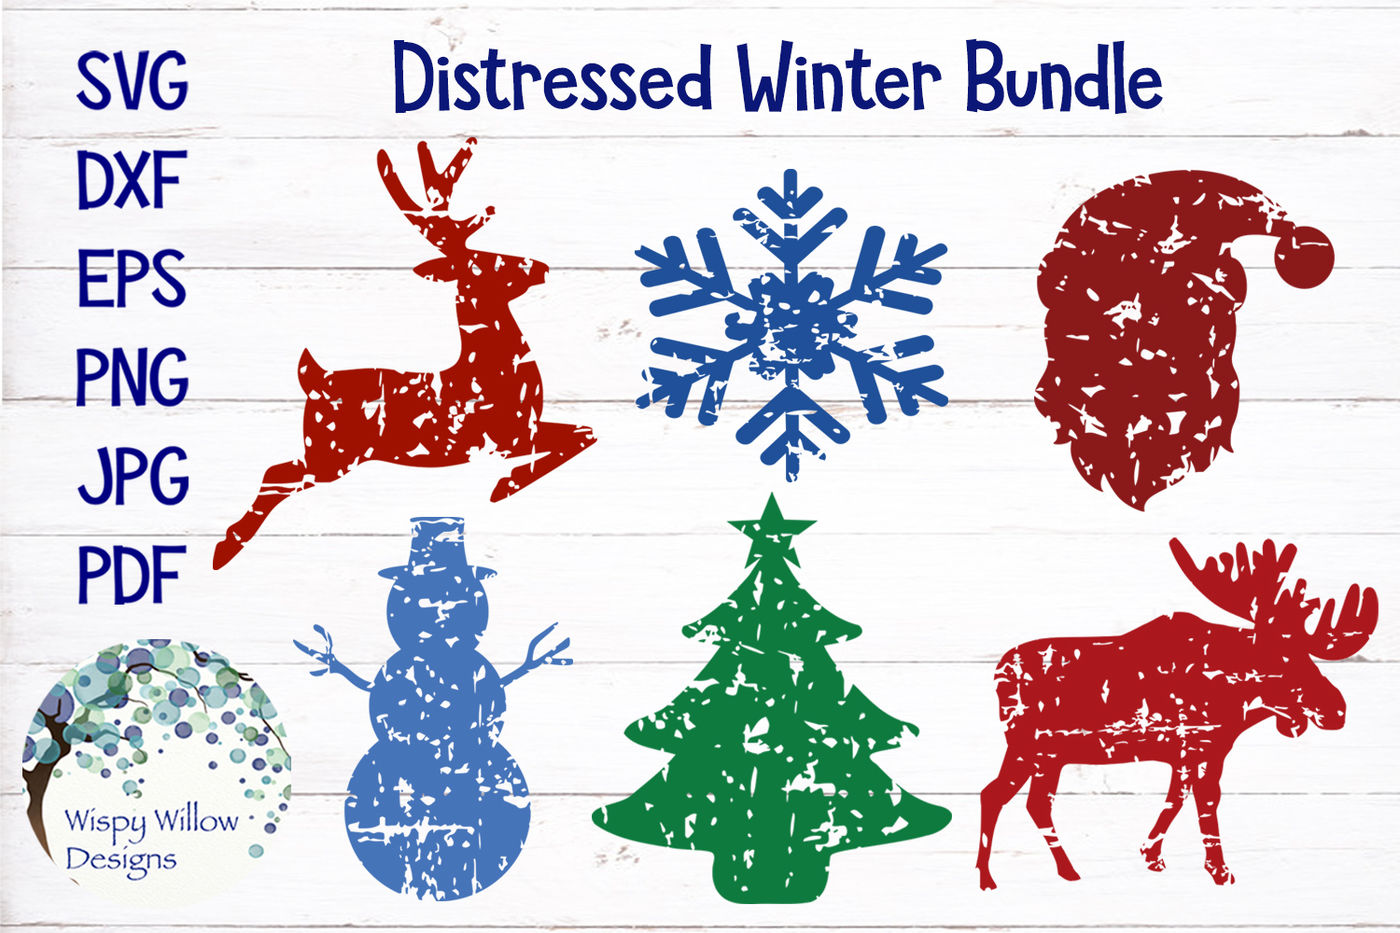 Download Distressed Grunge Winter Christmas SVG Bundle By Wispy Willow Designs | TheHungryJPEG.com